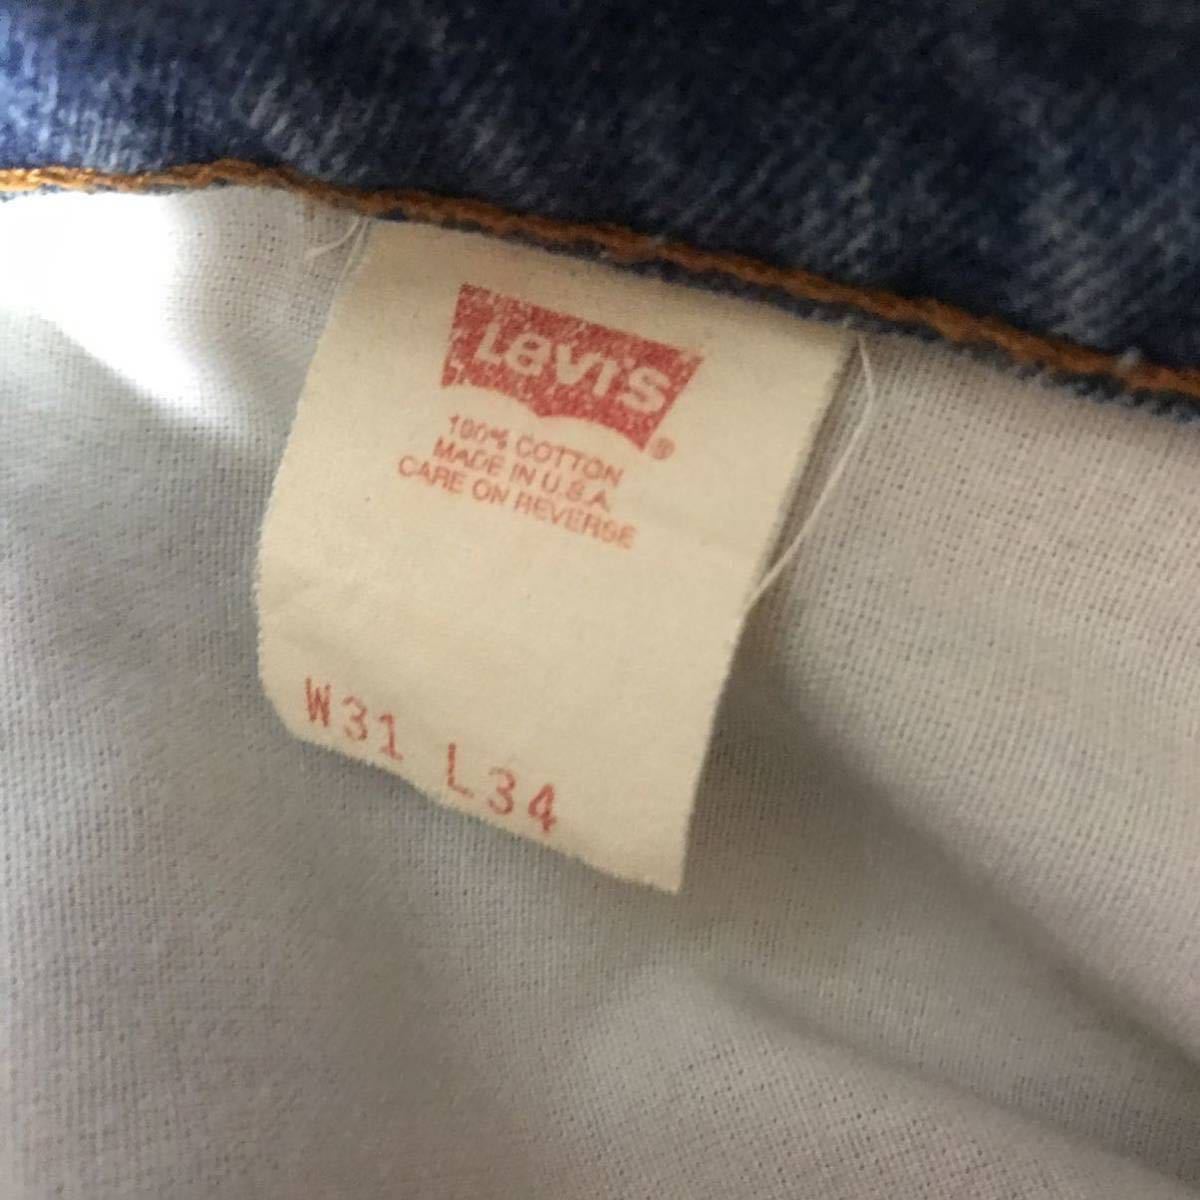 USED 80's〜90's LEVI'S 515 JEANS MADE IN USA Vintage 中古 リーバイス 515 ジーンズ アメリカ製 W30 L30 ビンテージ 送料無料